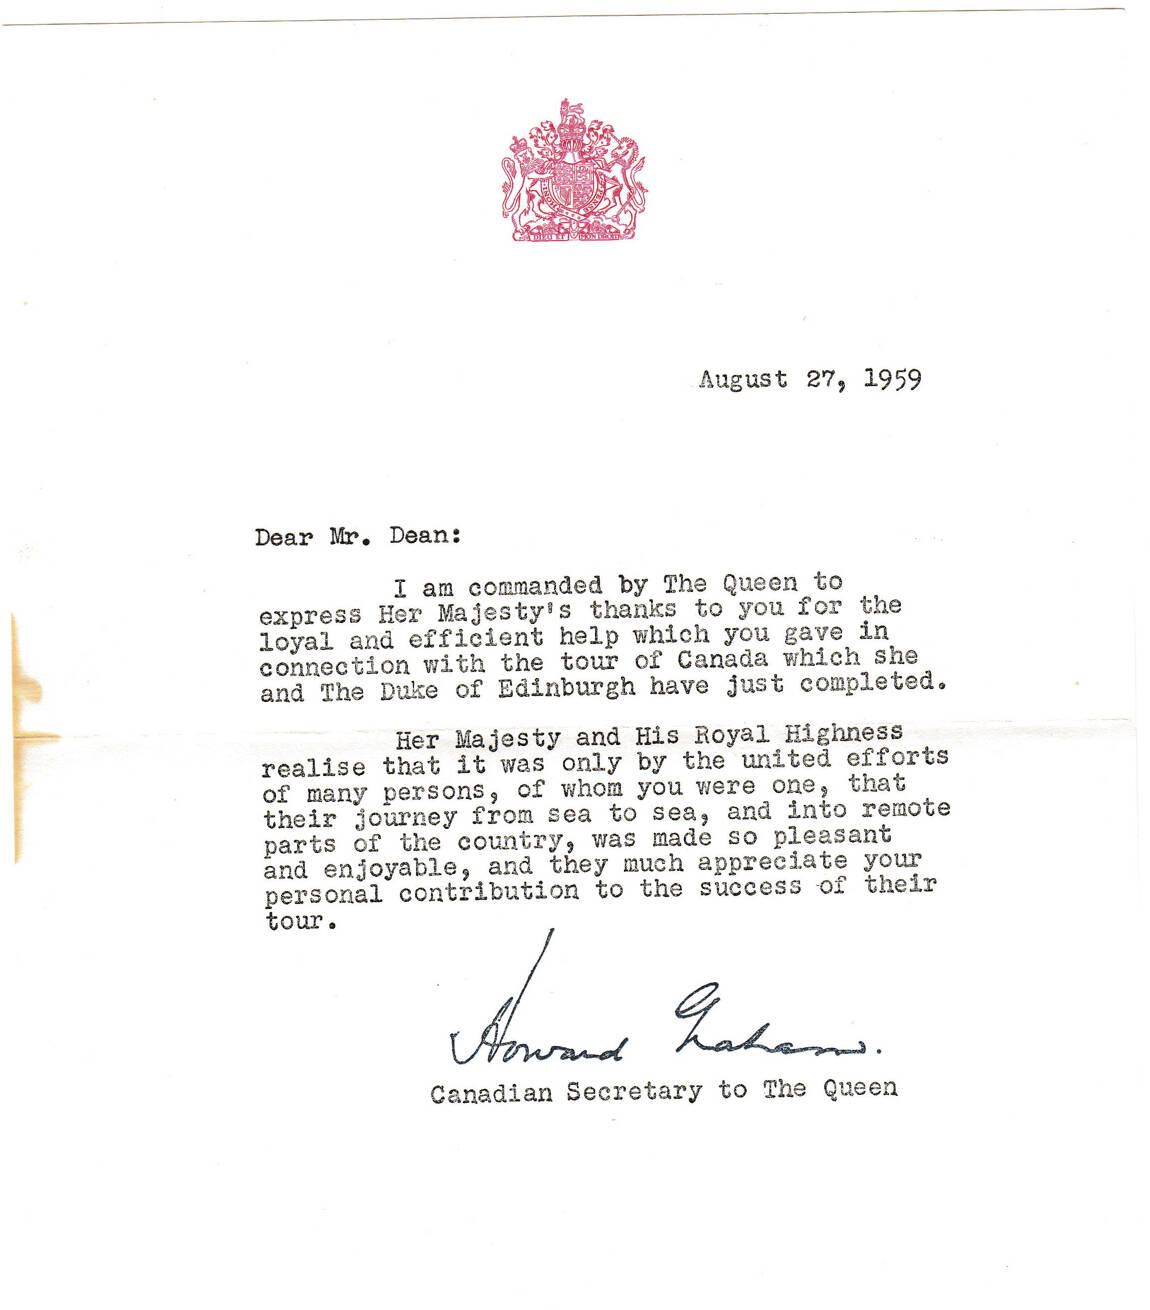 The personal letter thanking Benn Dean for his service in aiding the Royal Train in Revelstoke from Howard Graham, Canadian Secretary to the Queen. (Contributed by Dana Dean)